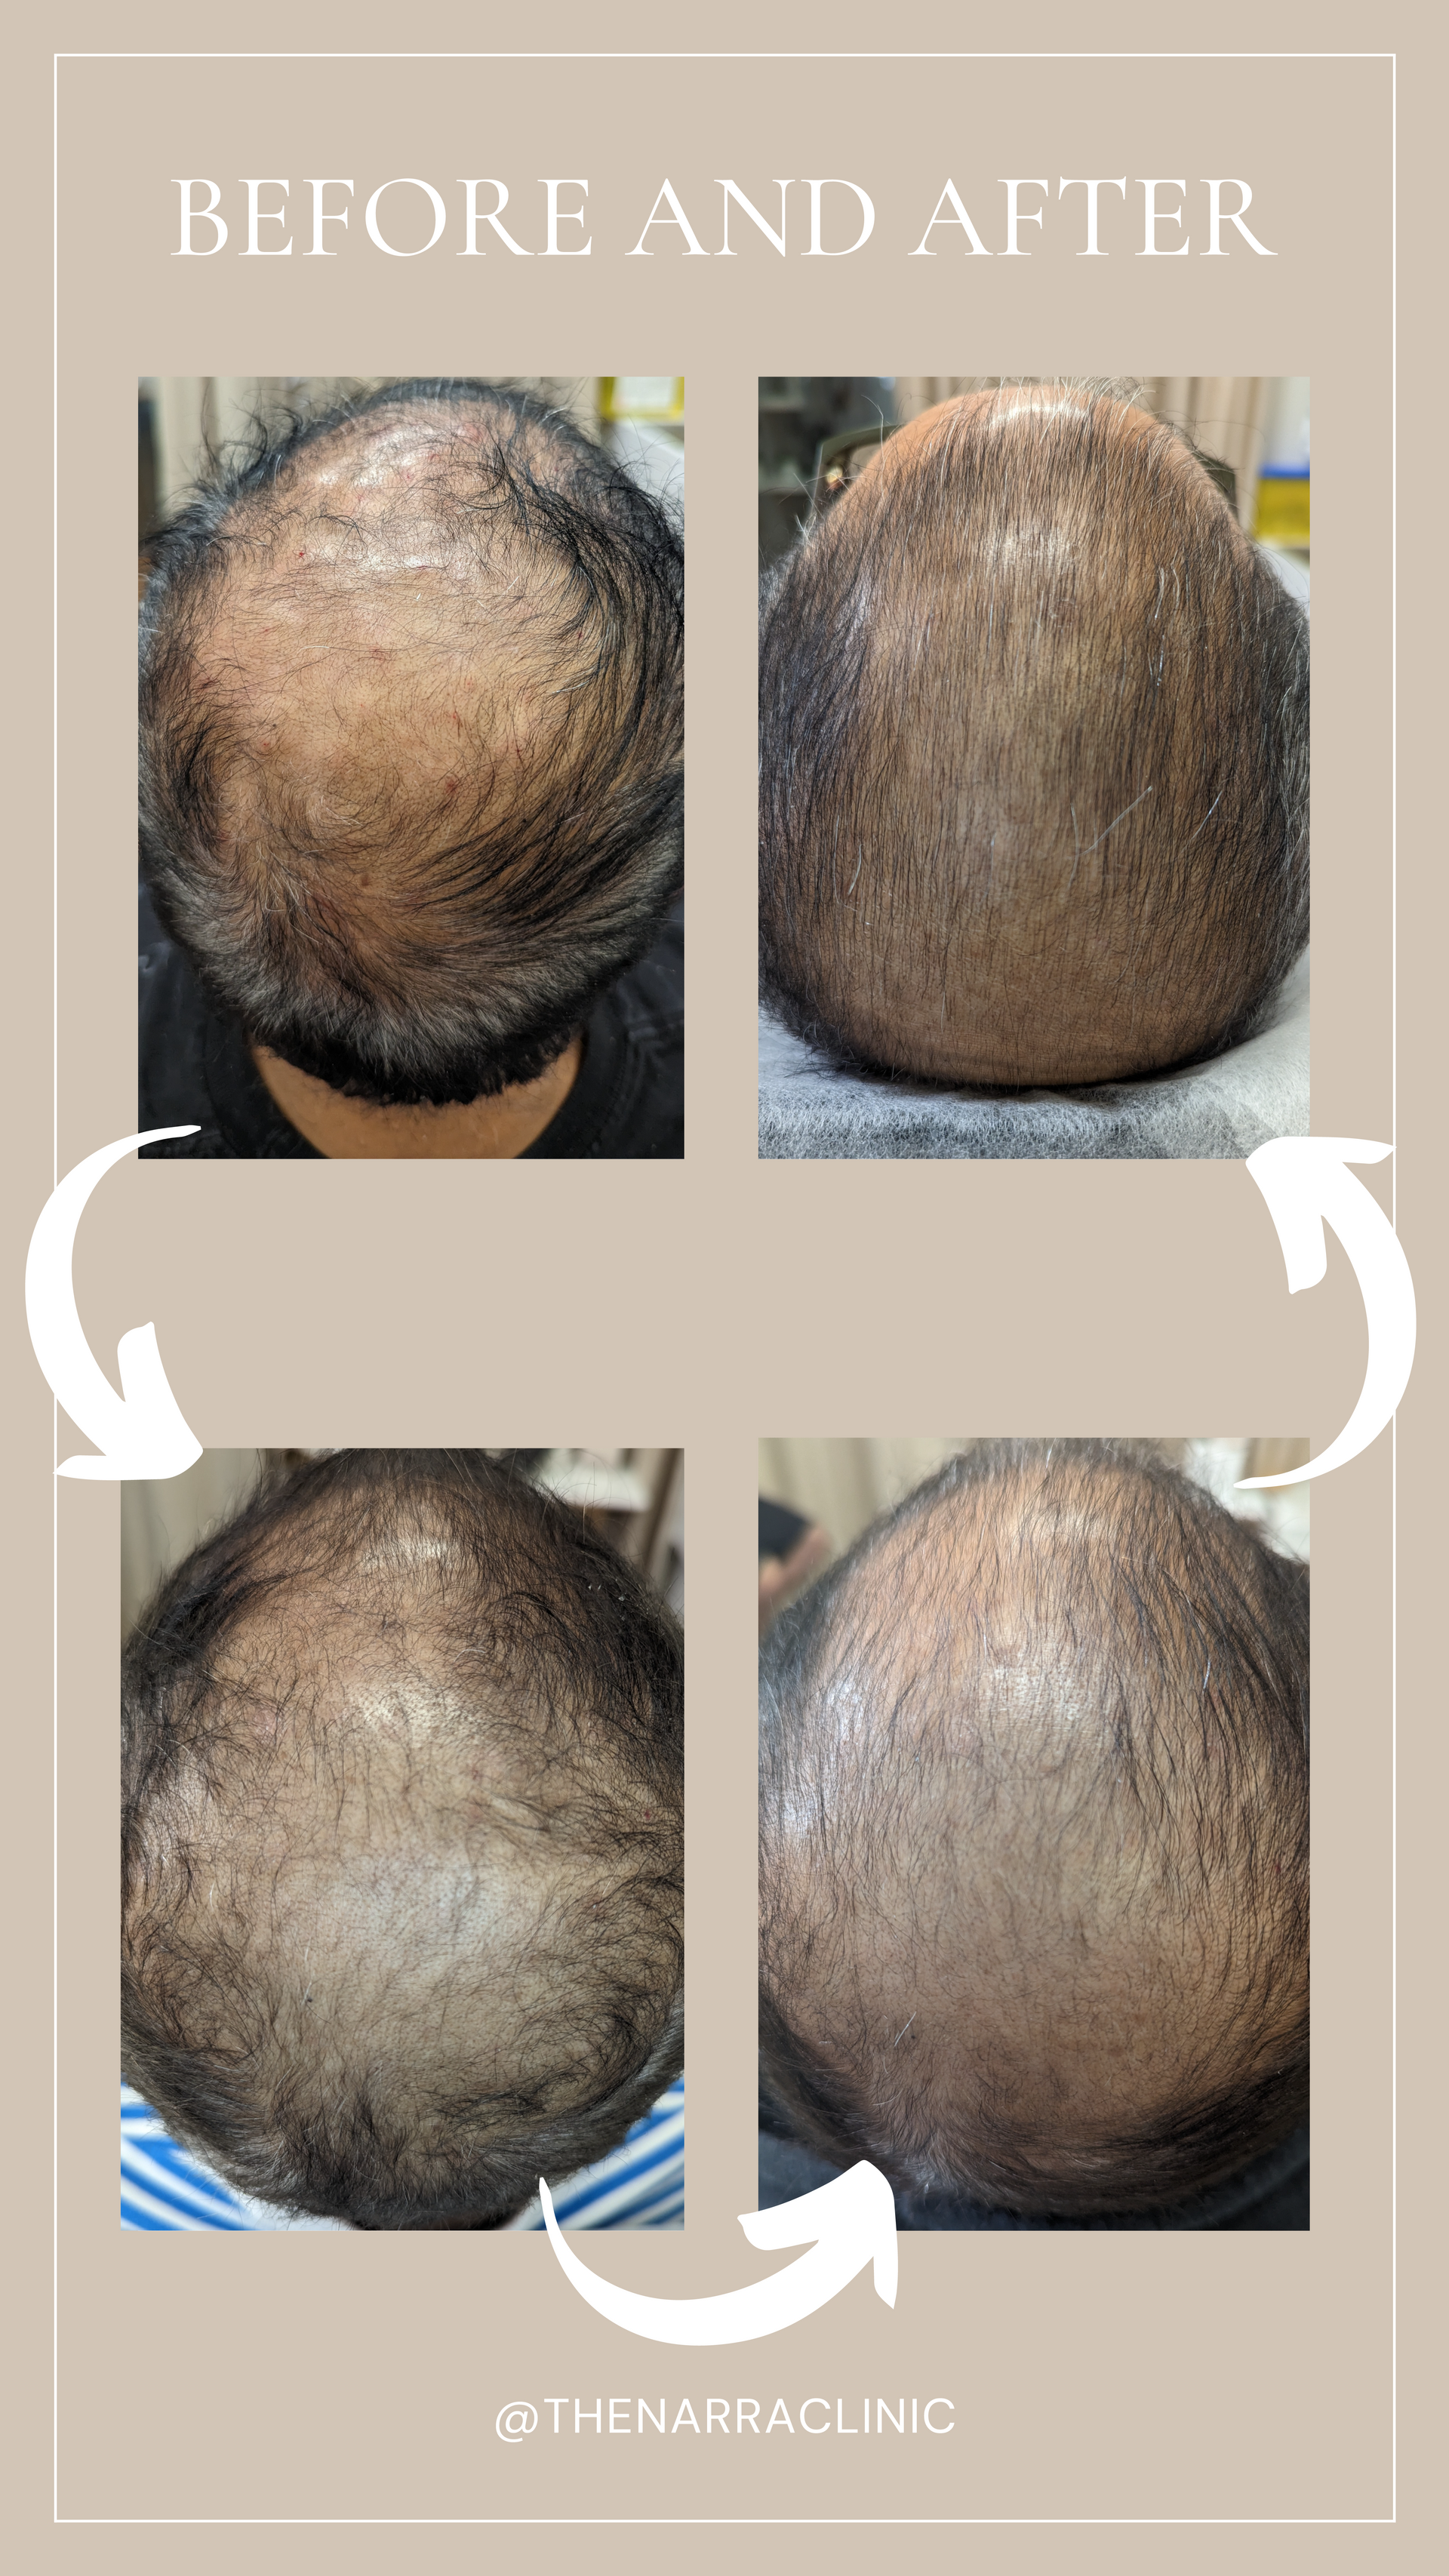 A man 's head is shown before and after a hair transplant.